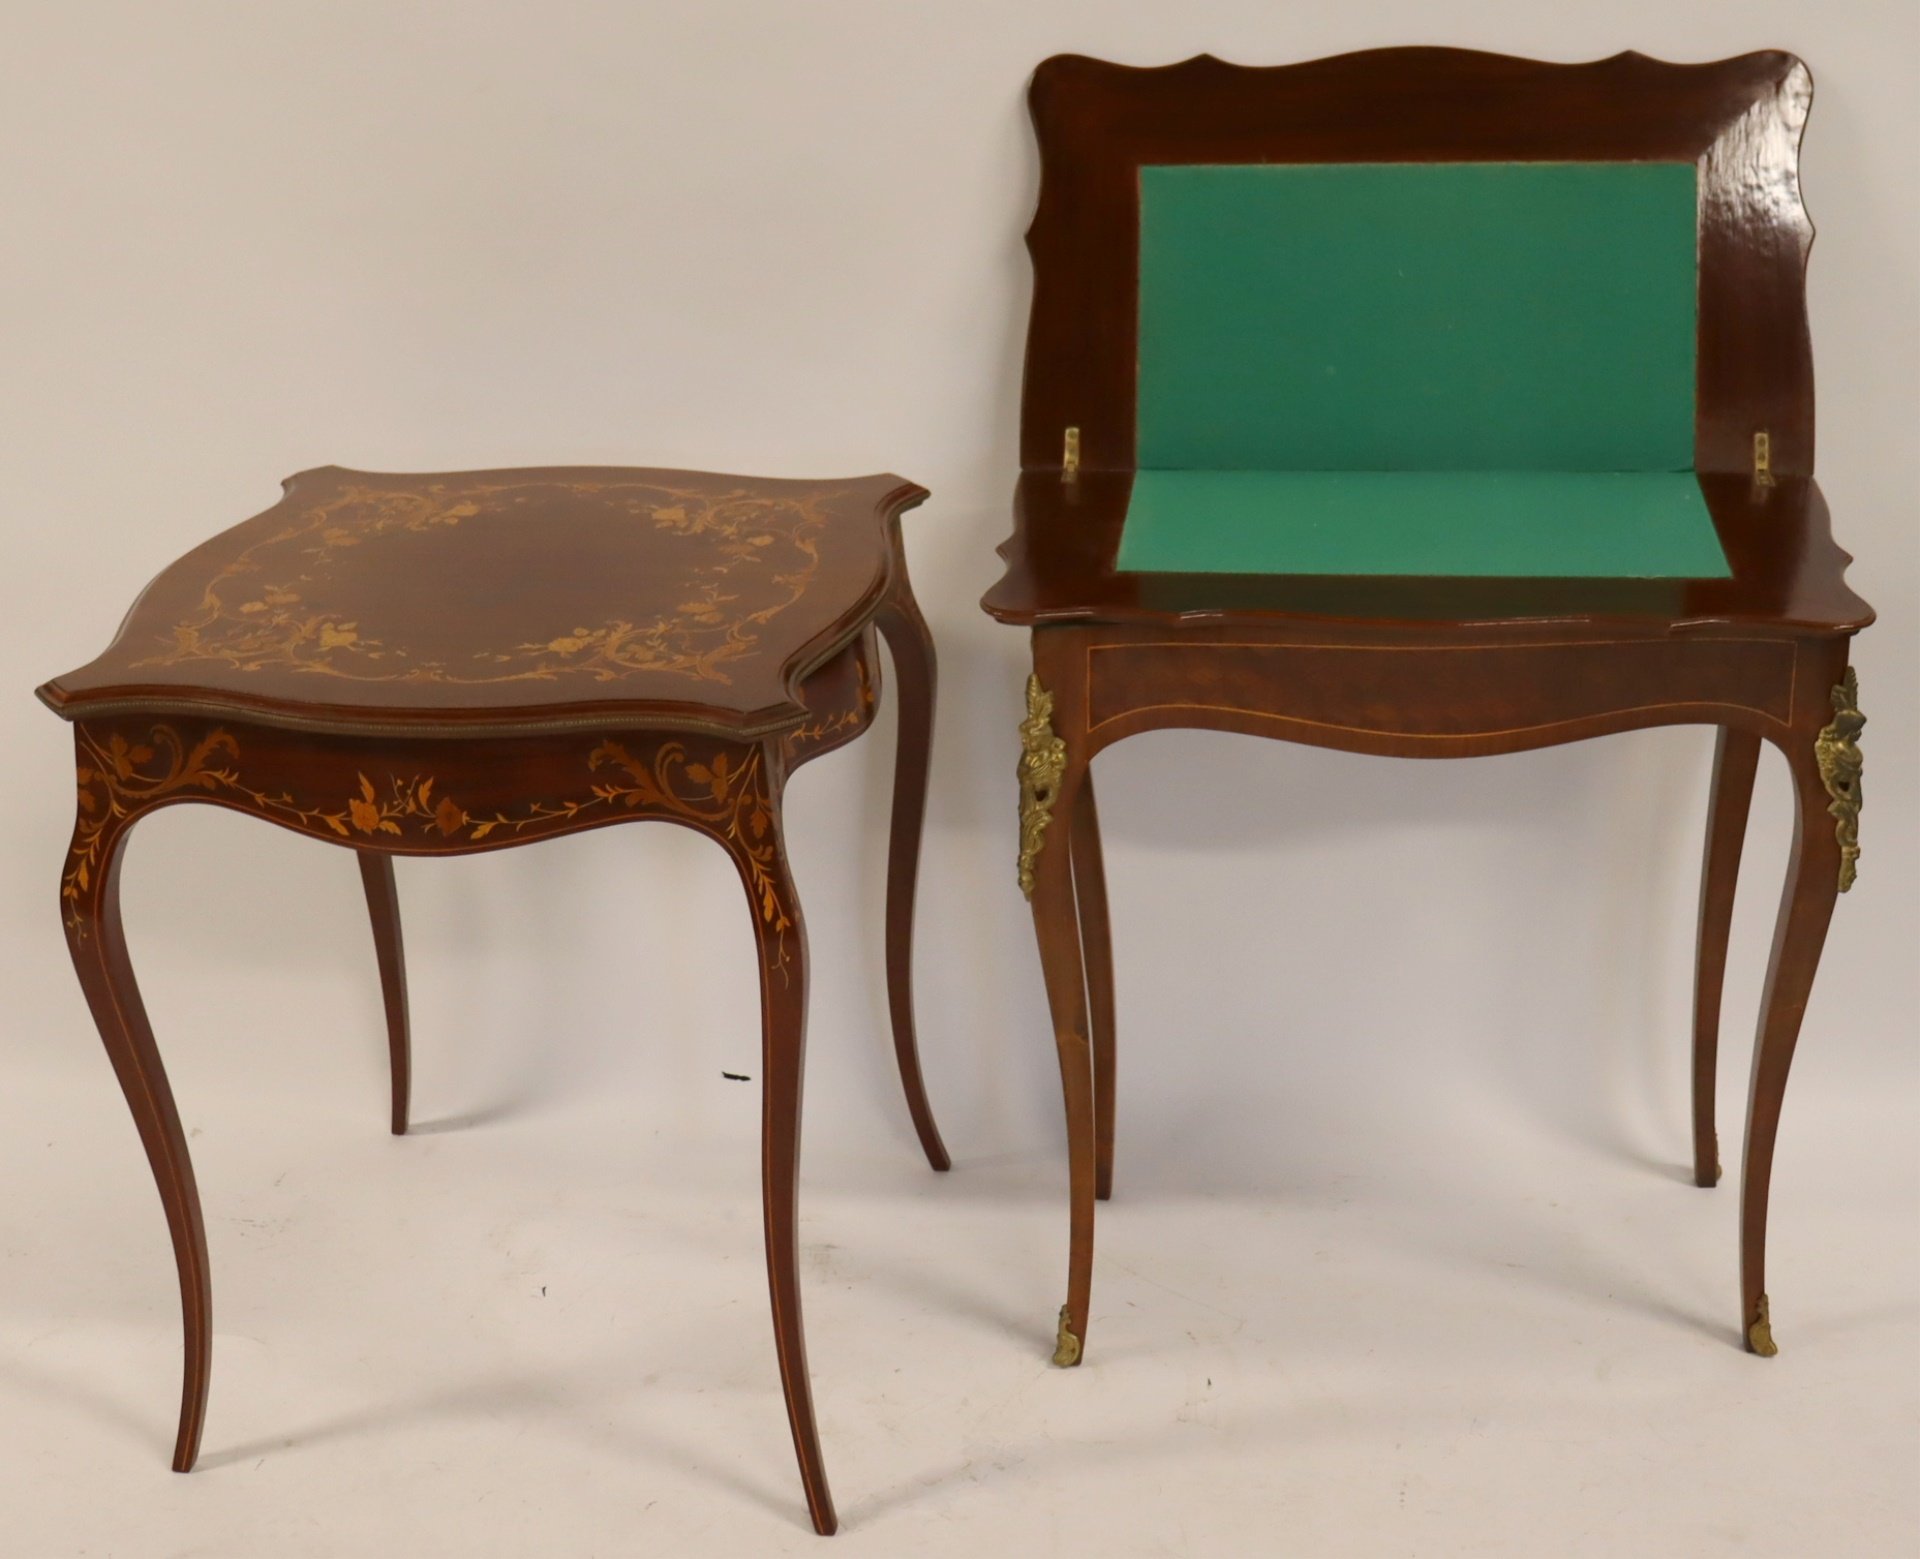 AN EDWARDIAN INLAID TABLE TOGETHER 3b37fc